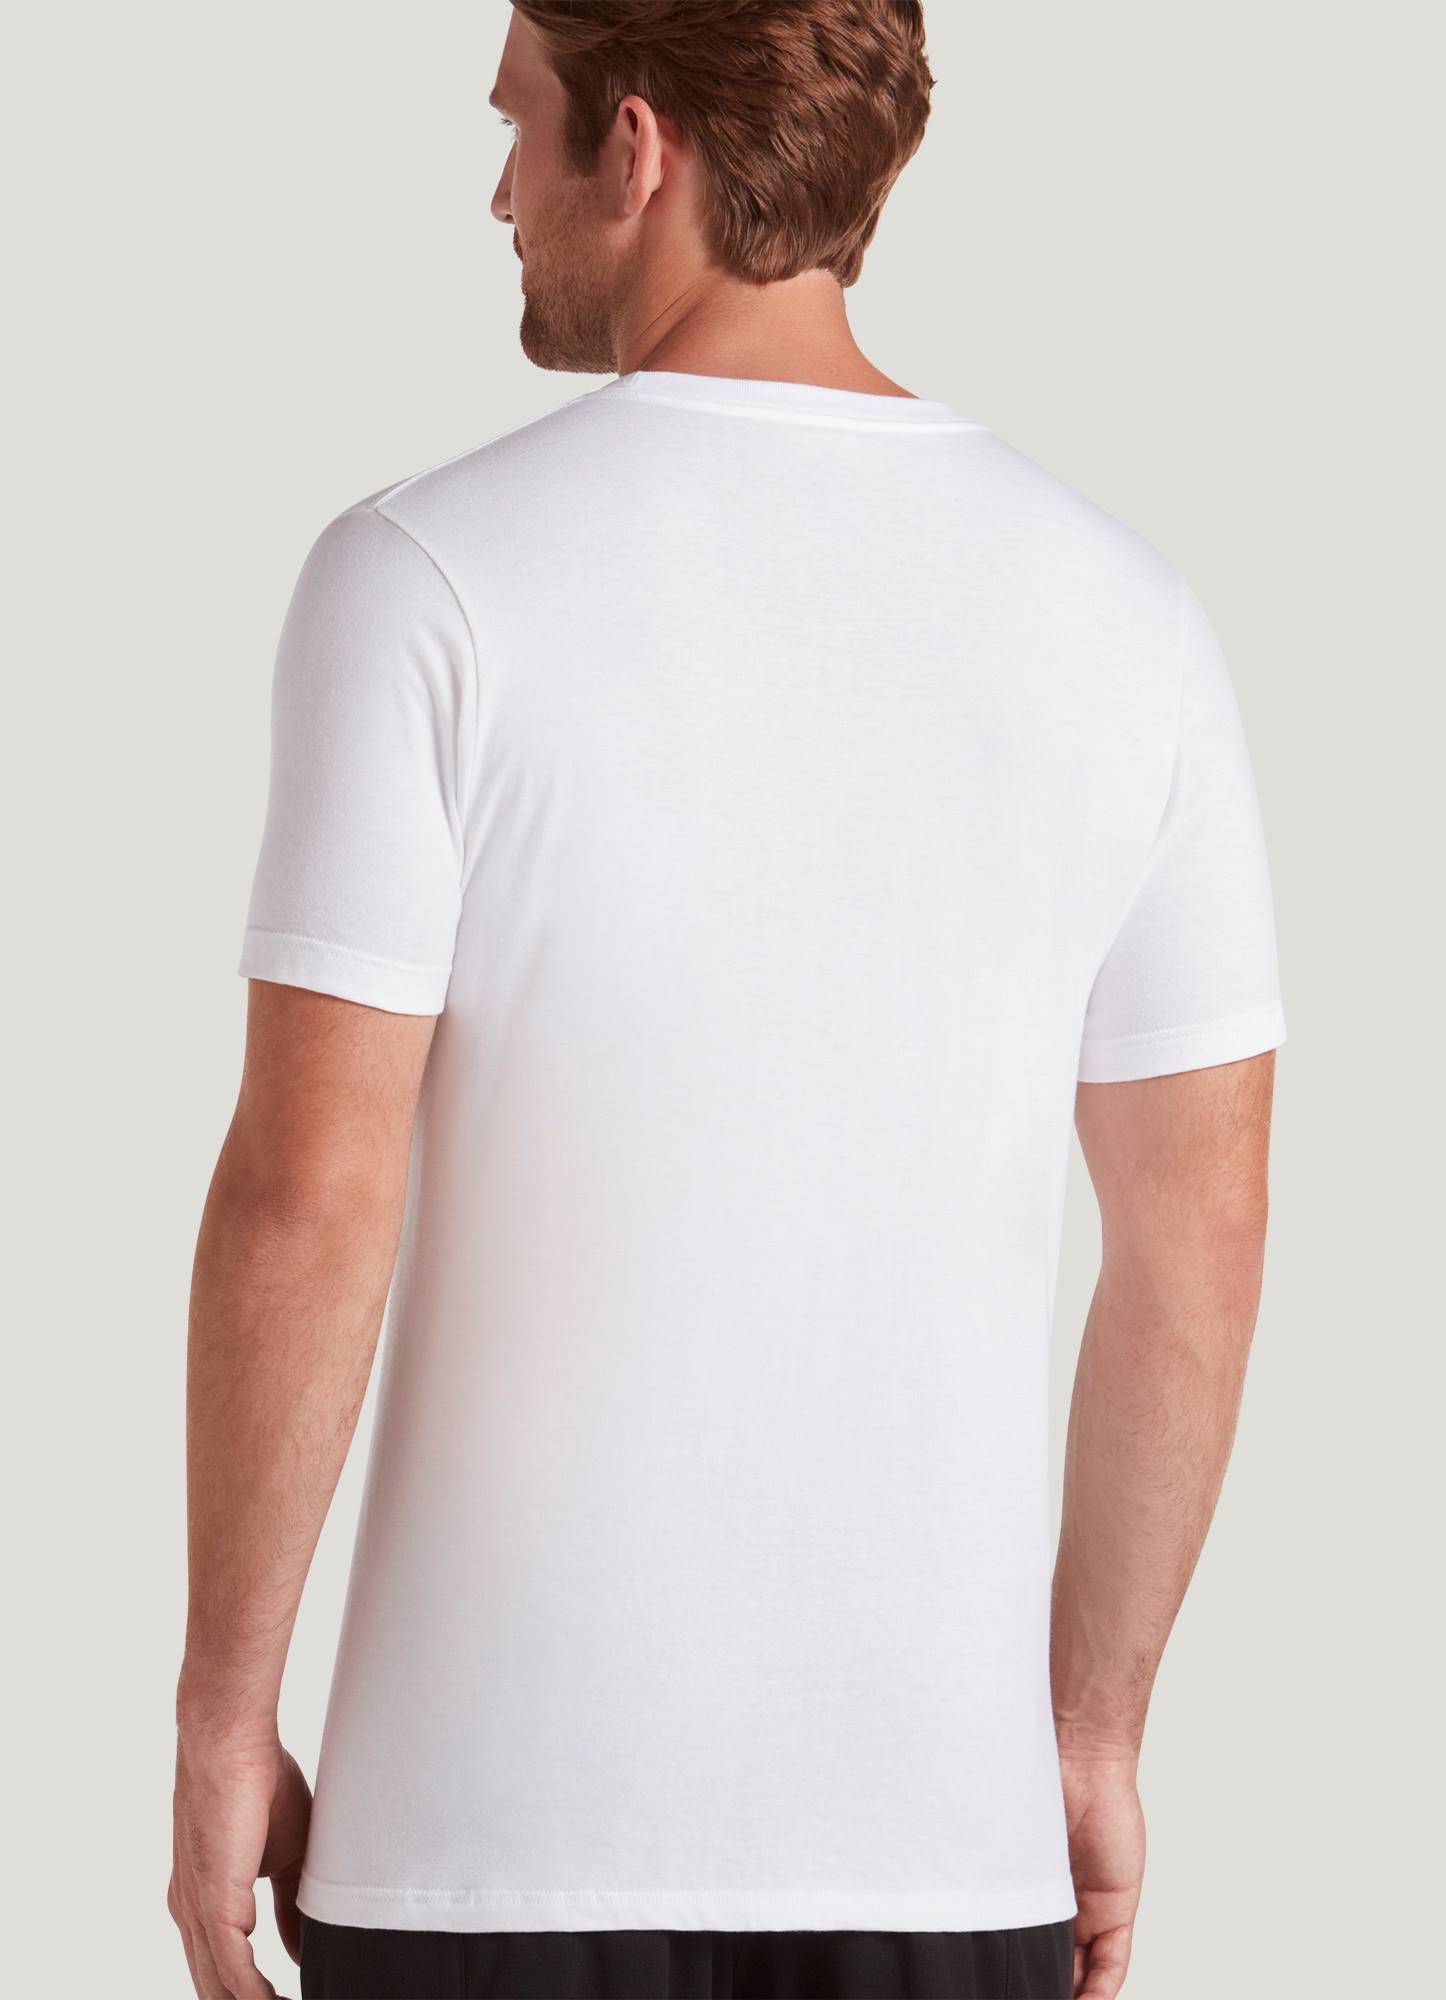 Hanes Authentic Men's T-Shirt (Big & Tall Sizes Available)